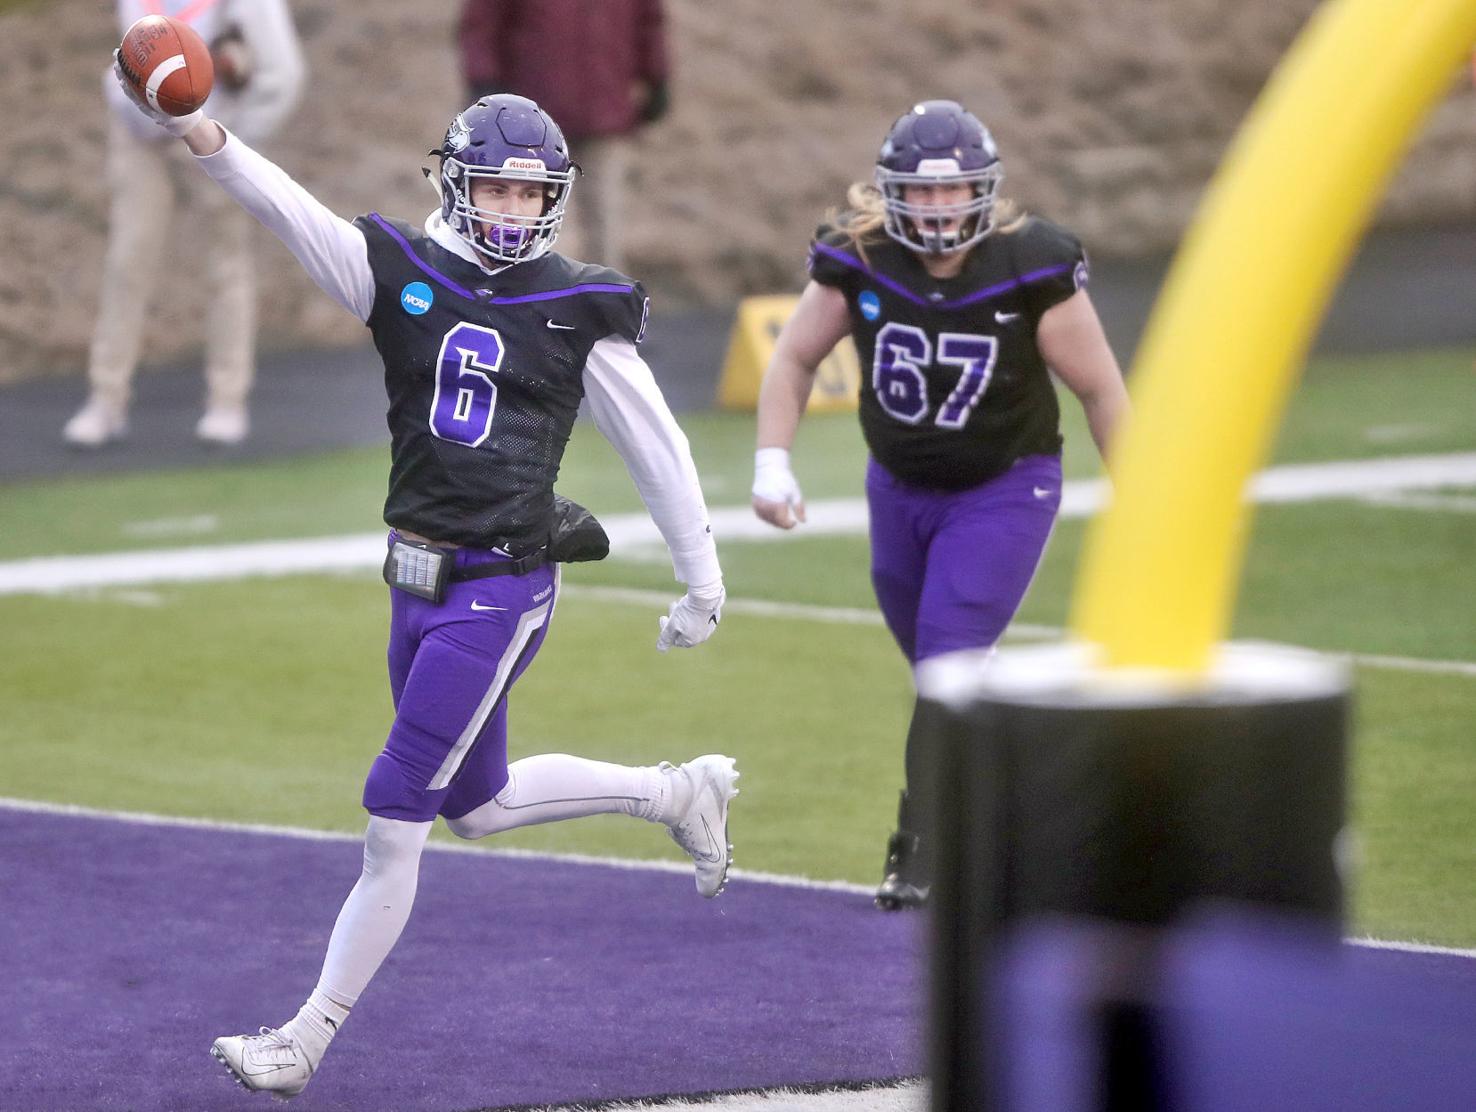 UW-Whitewater releases 2020 football schedule | Sports | dailyunion.com